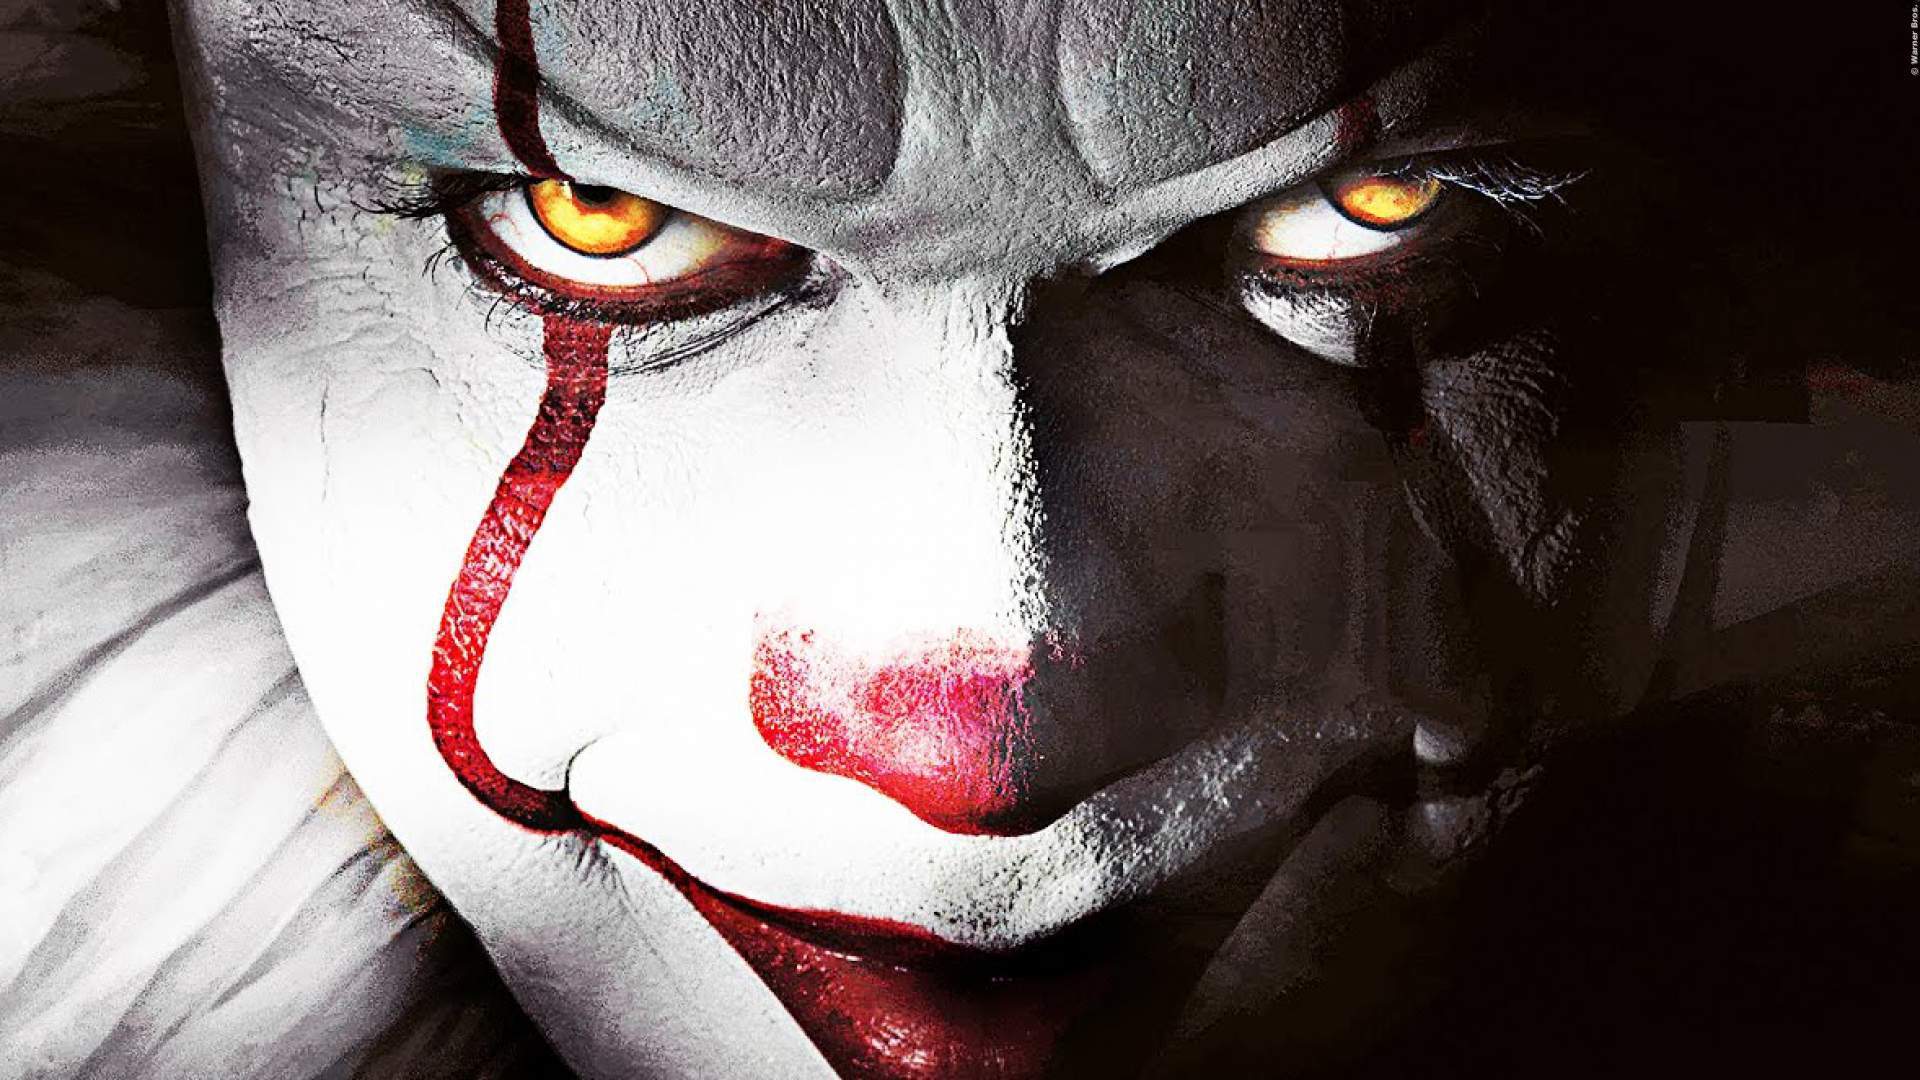 Smiley Pennywise In Dark Background HD Pennywise Wallpapers  HD Wallpapers   ID 85676